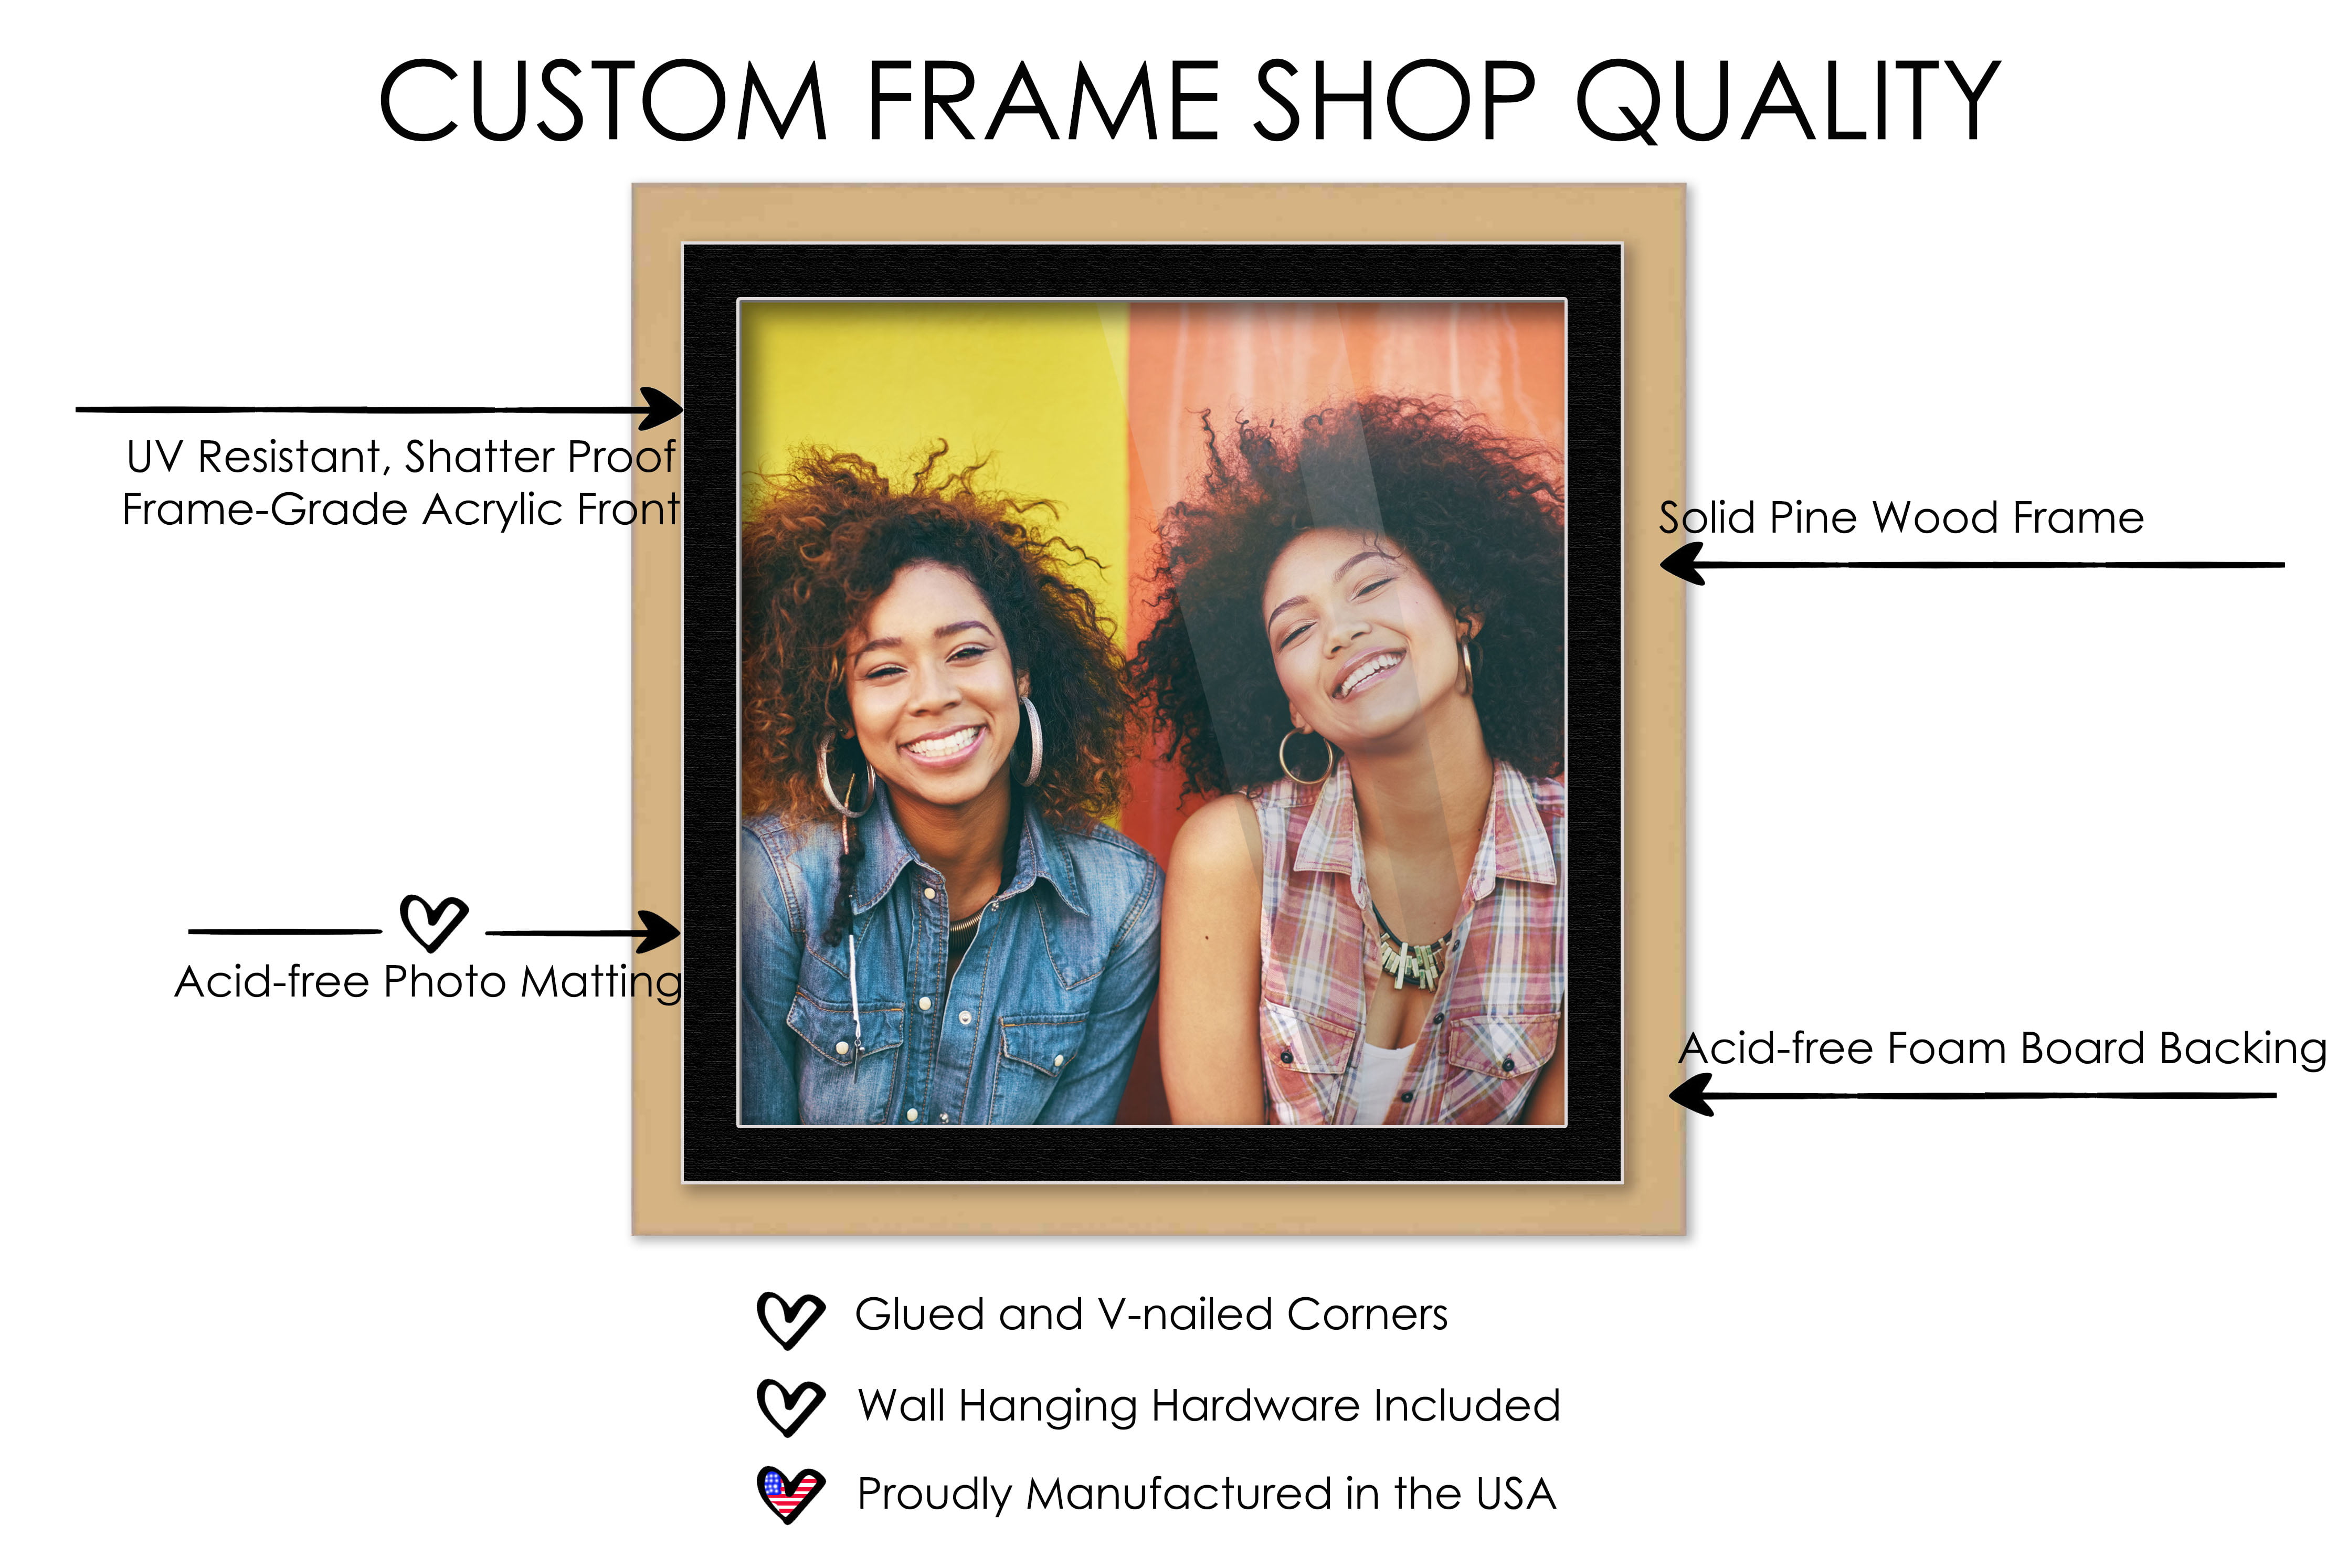 20x20 Frame with Mat - Black 22X22 Frame Wood Made to Display Print or Poster Measuring 20 x 20 Inches with Black Photo Mat